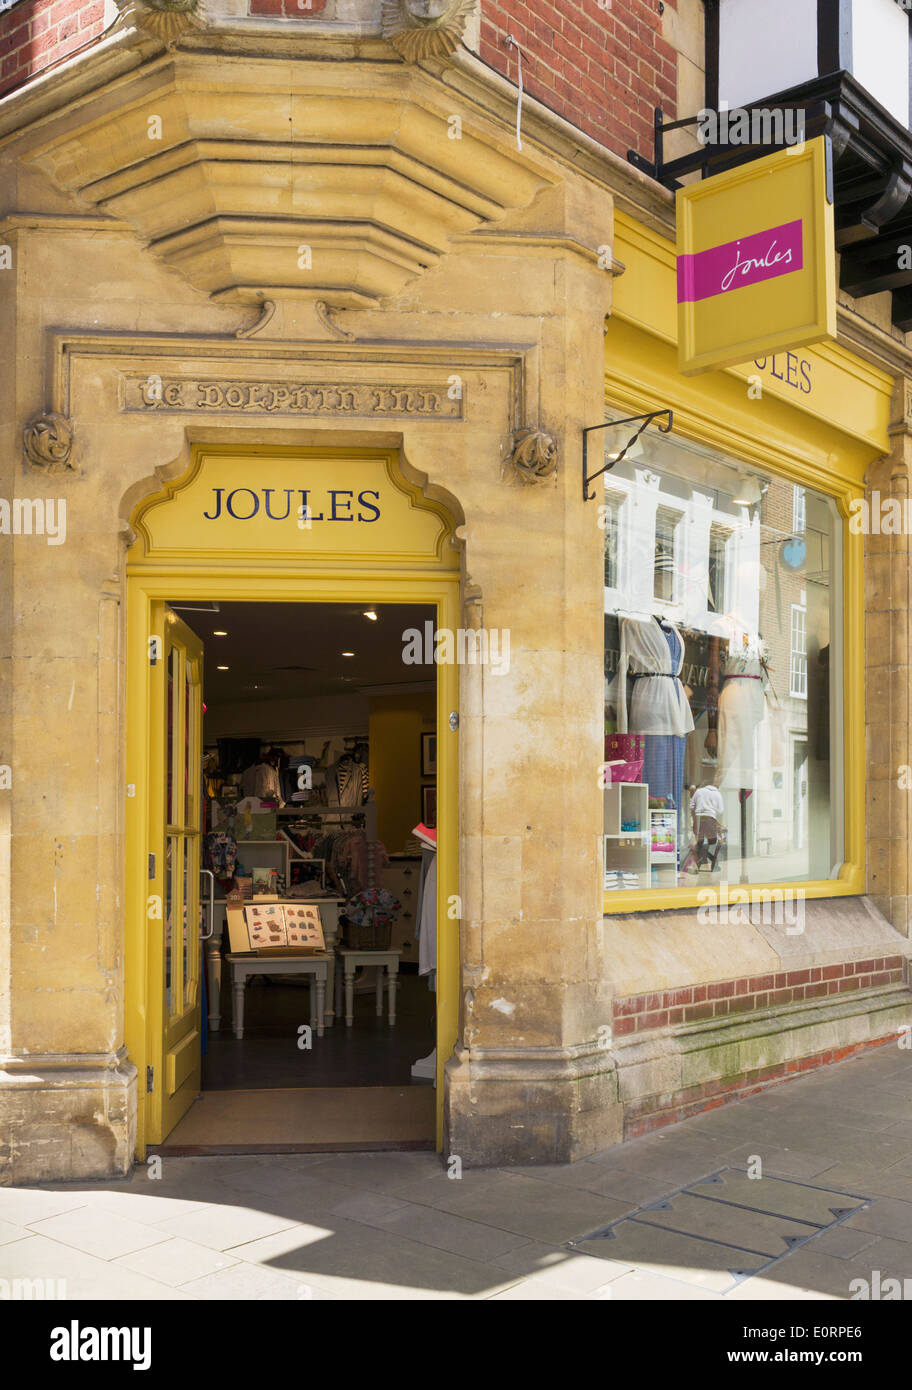 Joules clothing chain store, England, UK Stock Photo